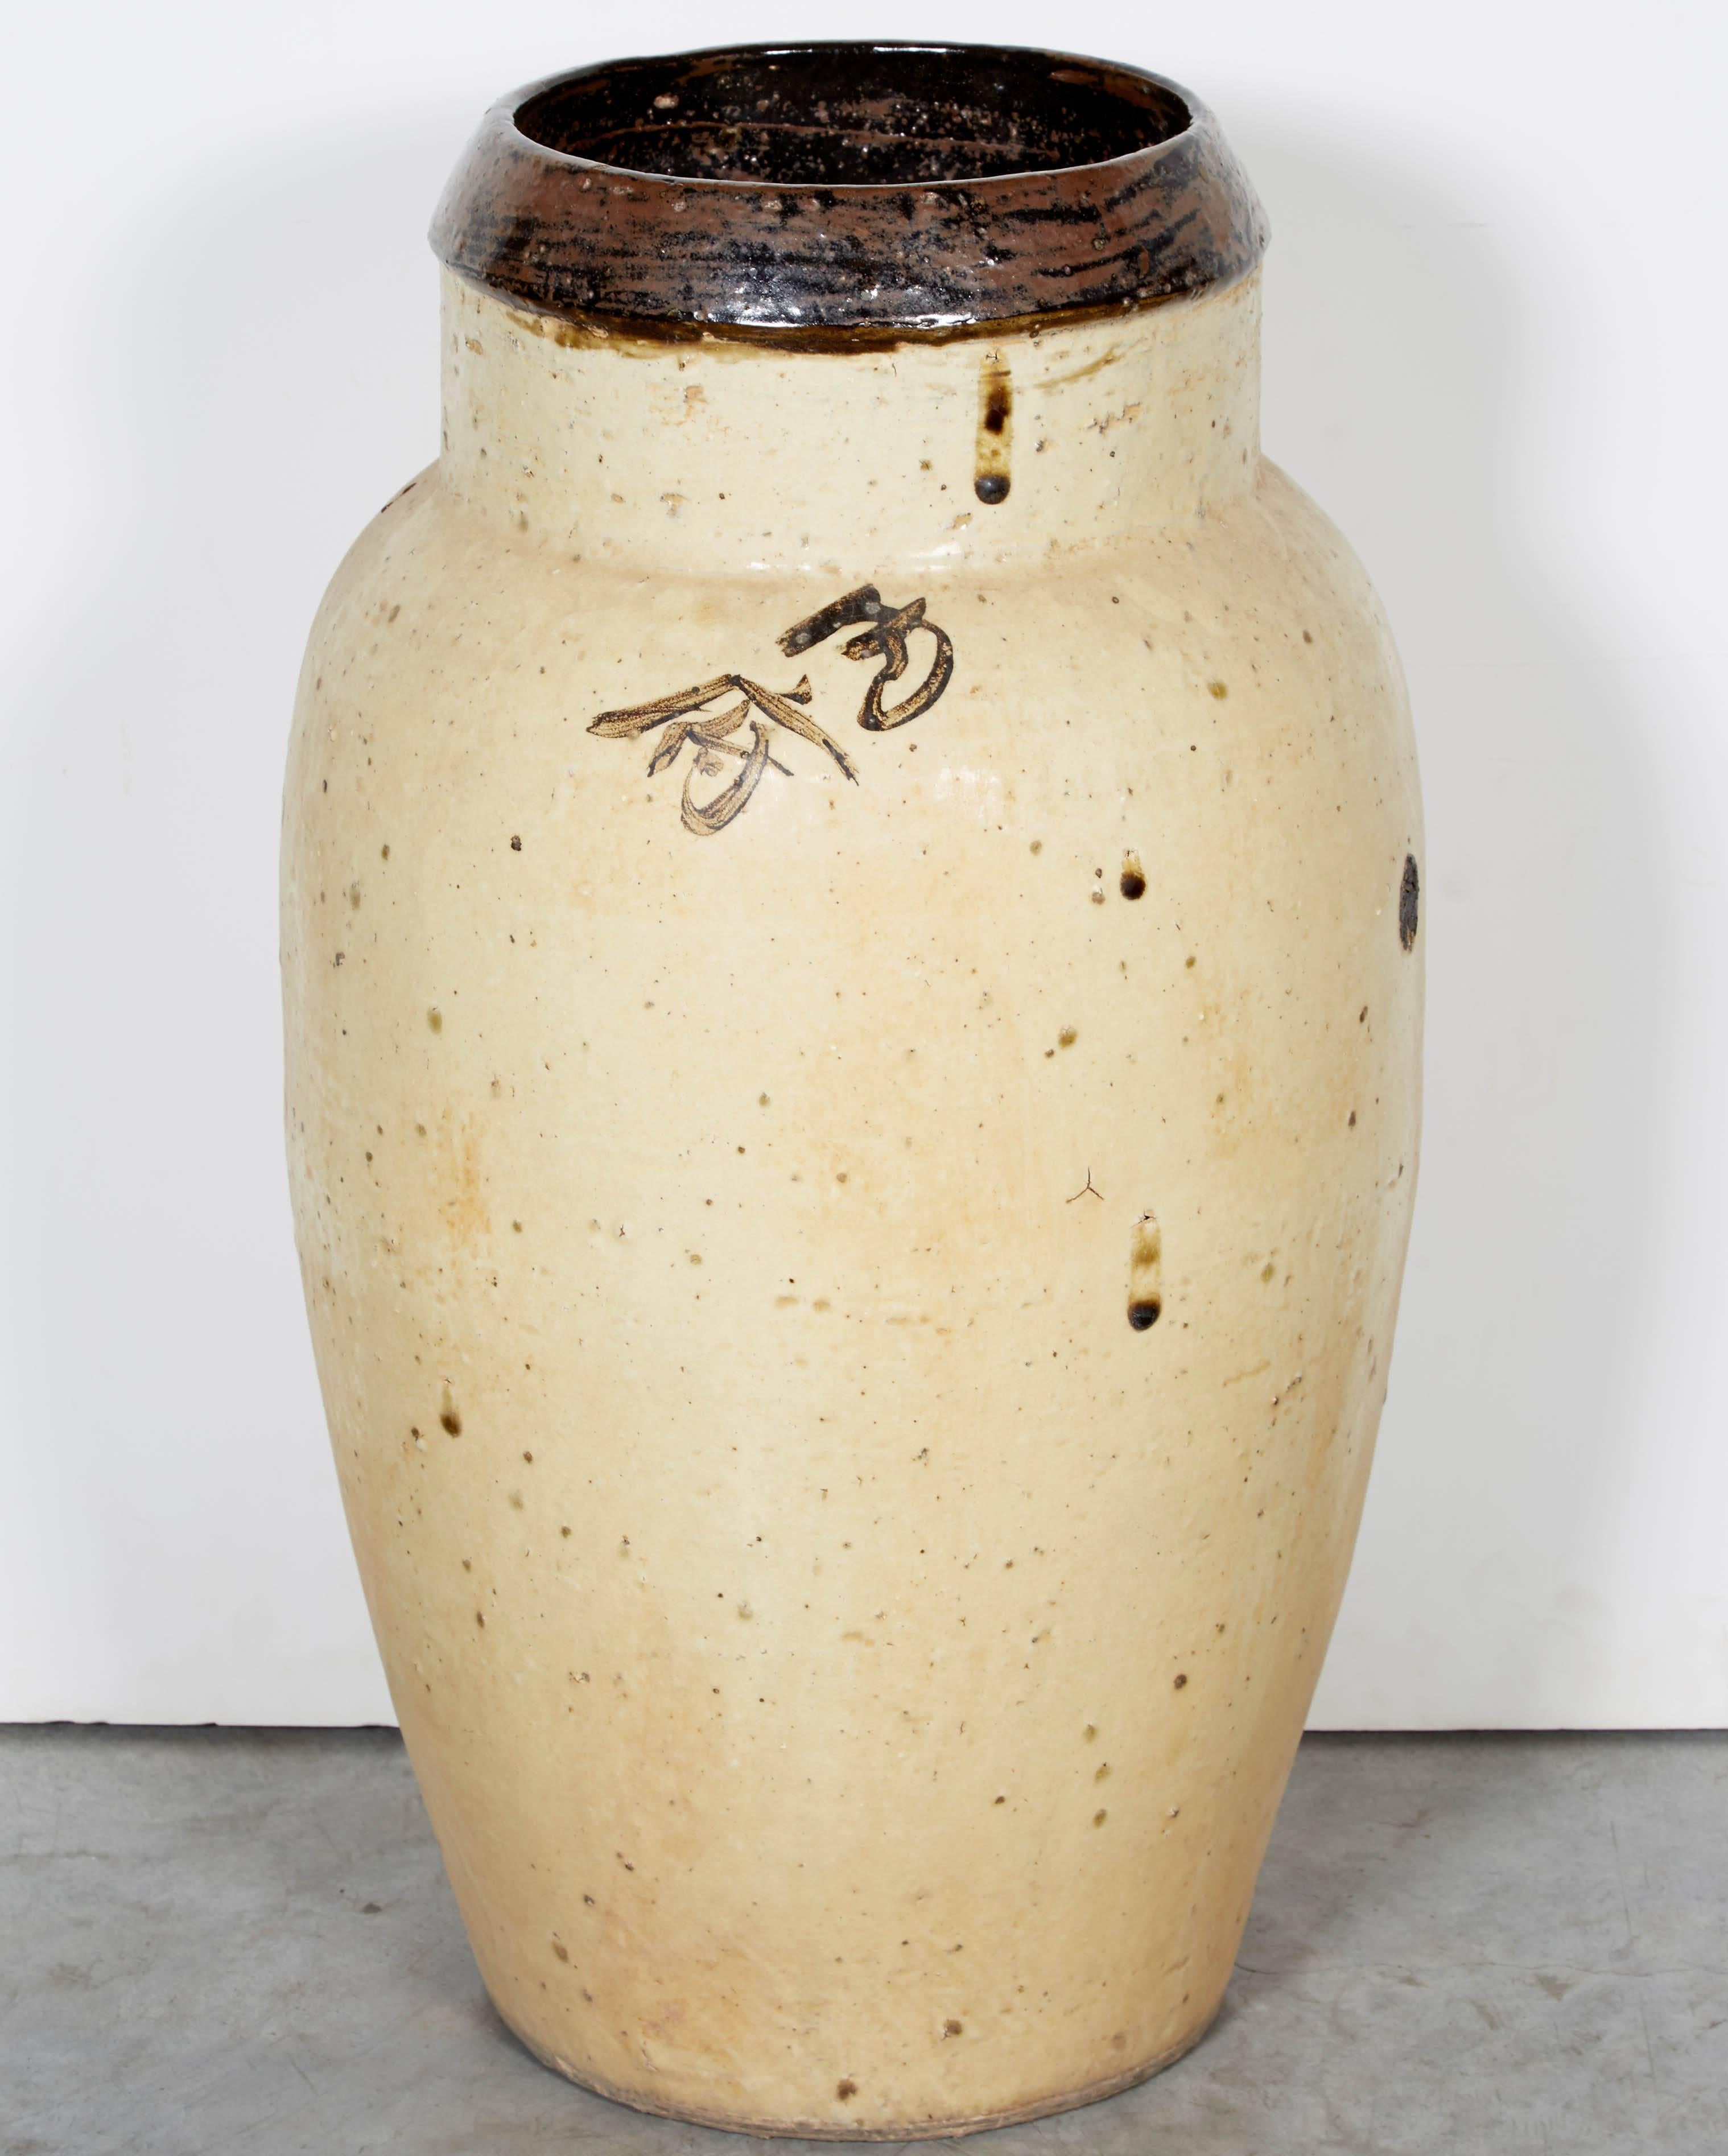 19th century wide mouth ceramic wine jar with dark lip, beautifully glazed off-white body and striking Chinese characters. From Shanxi province, circa 1850. 
CR725.